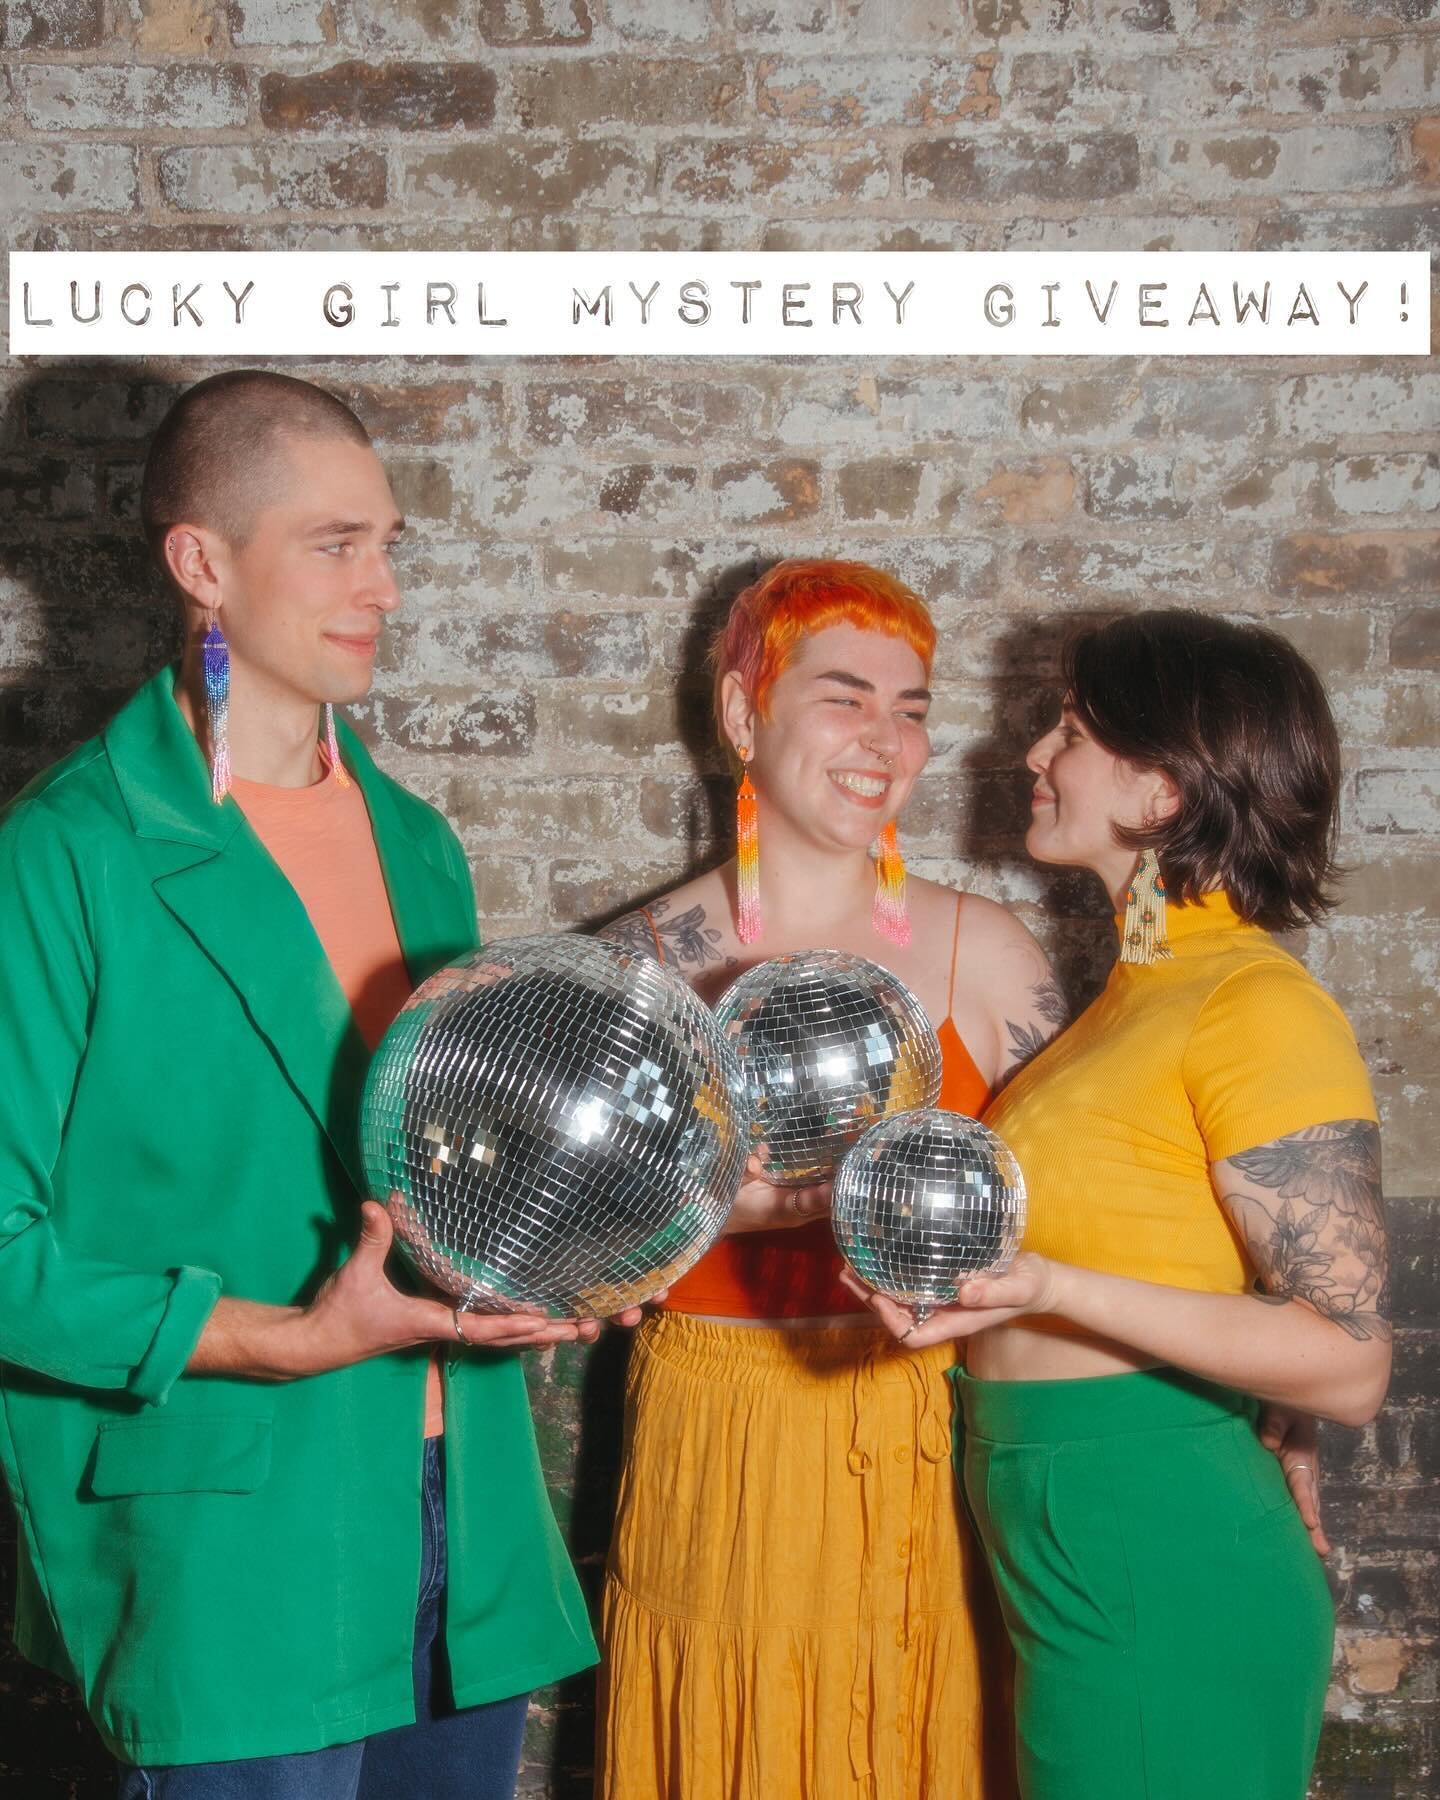 I&rsquo;ve got a little giveaway for my @luckygirlpopup lovers! 

1) enter for your chance to win 2 tickets to Lucky Girl THIS Sunday + a surprise SMALL pair of earrings from me!  Simply drop an emoji below 🧡

2) already have tickets?  Drop the make